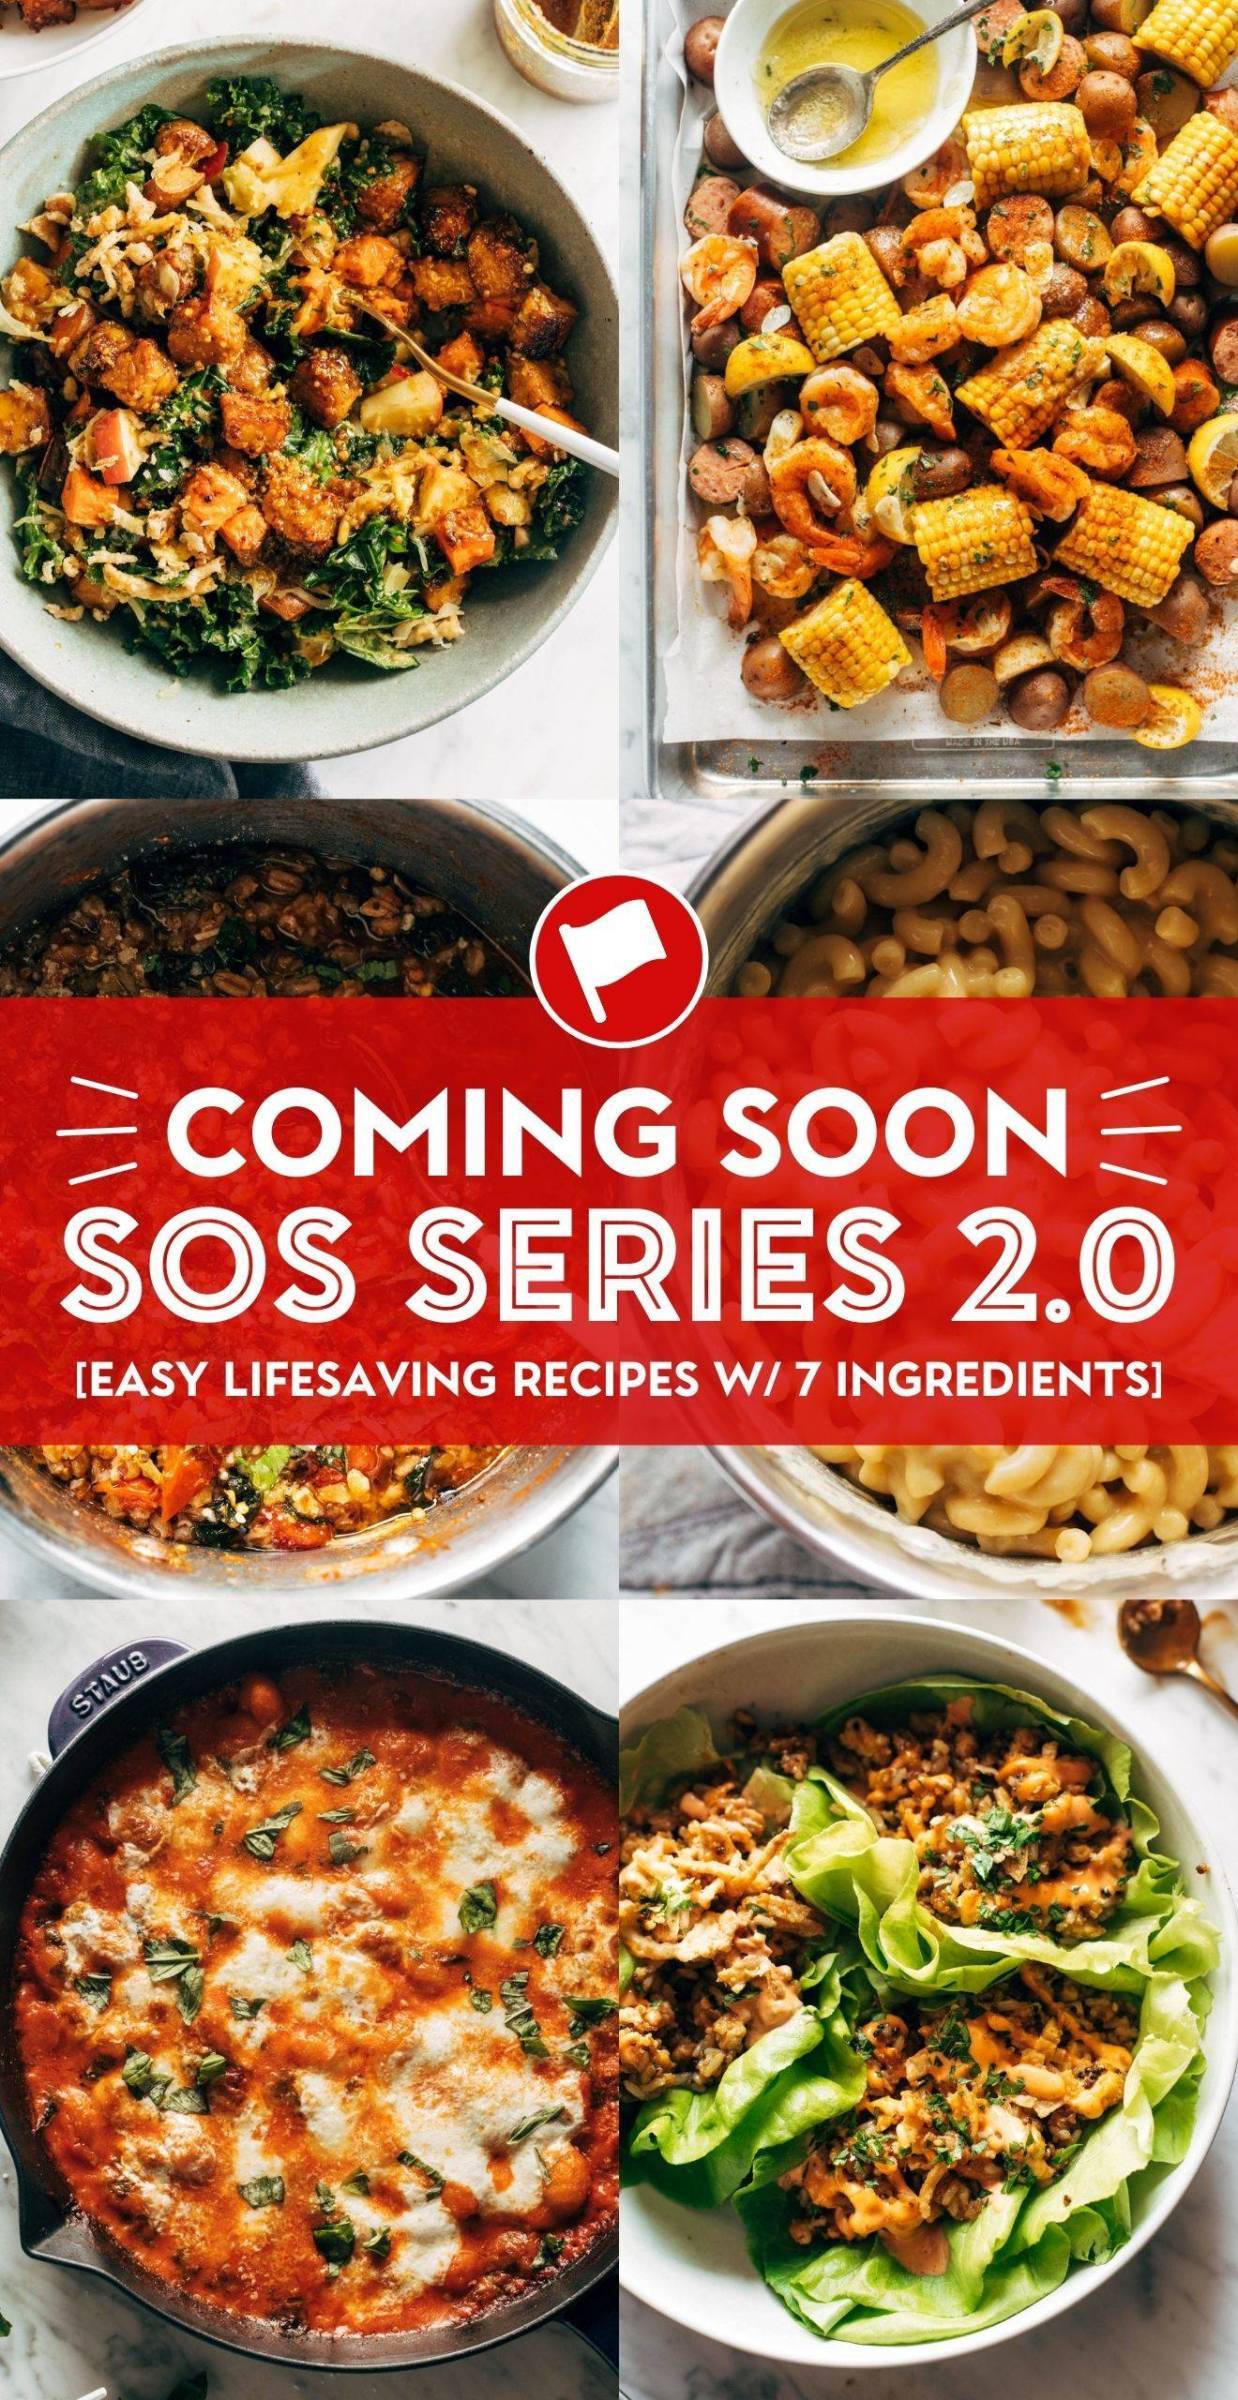 Glamour shots of 6 SOS series 2.0 recipes with banner that says, "Coming soon".